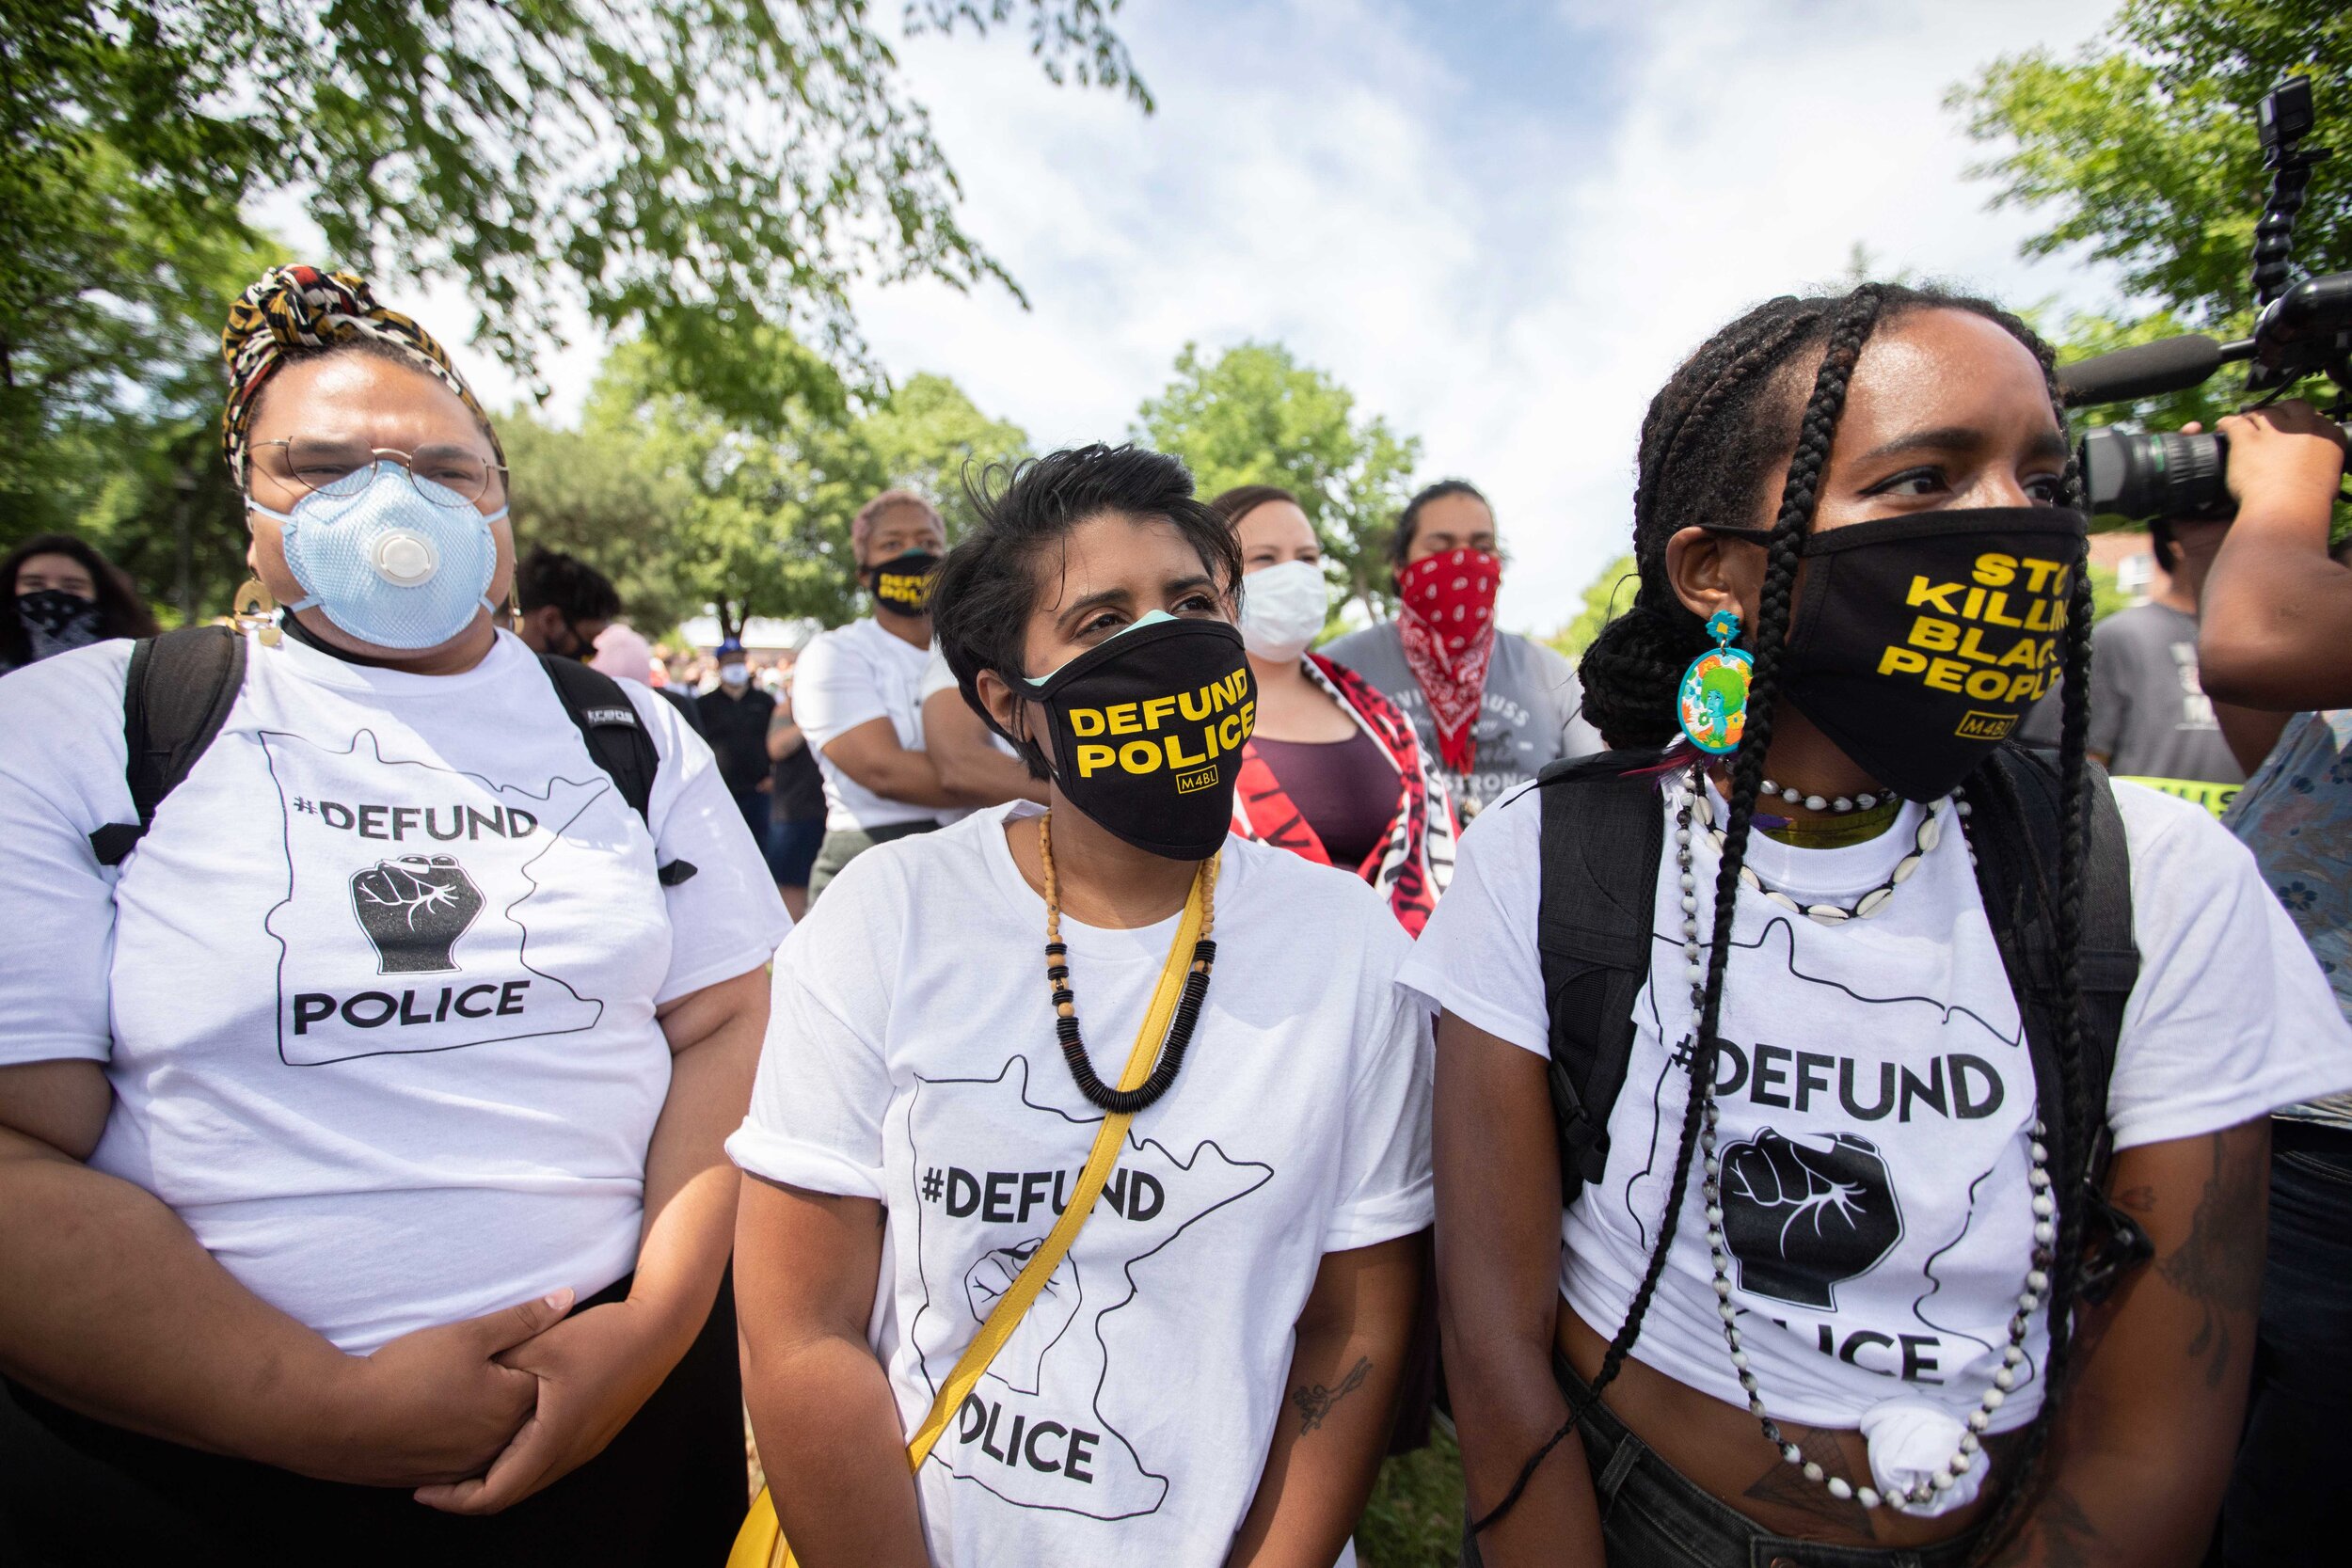  Protesters listen to speakers at a protest demanding the defunding of the Minneapolis Police Department at Bottineau Field in Minneapolis, Minnesota on Jun 6, 2020. 